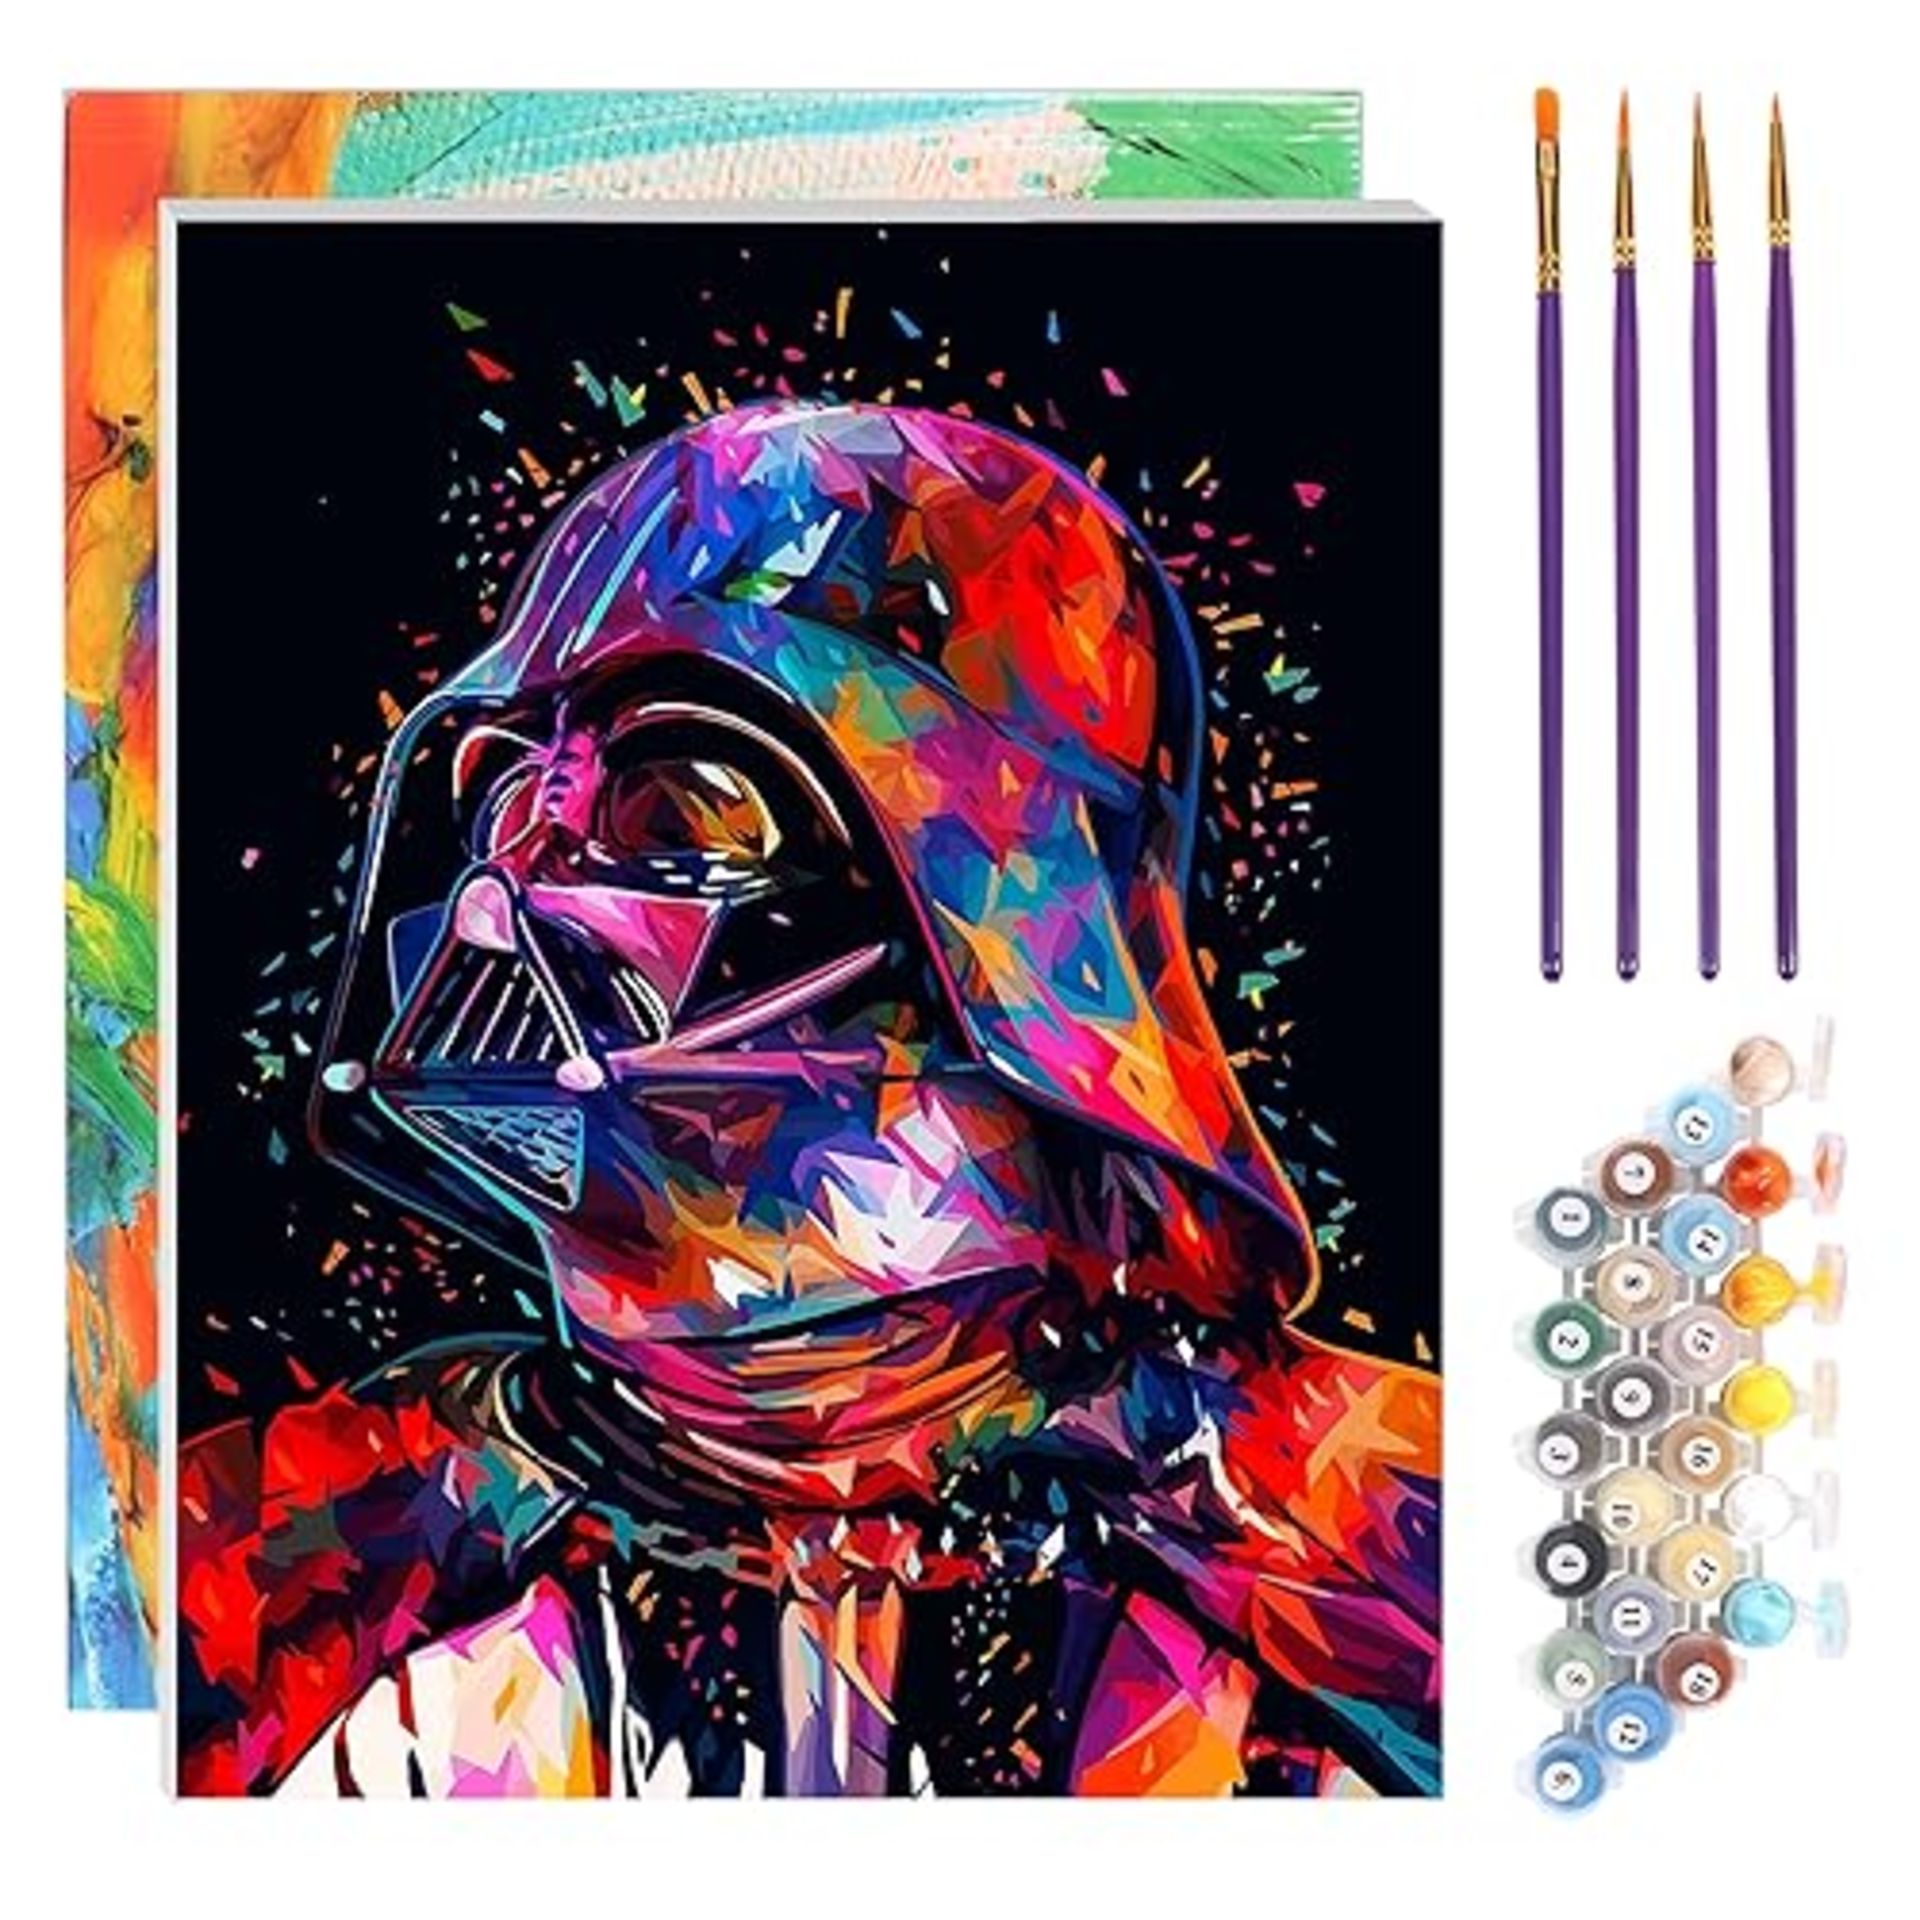 TONZOM Paint by Numbers Kits 40cm x 50cm Canvas DIY Acrylic Painting for Adults and Kids Star Wars 